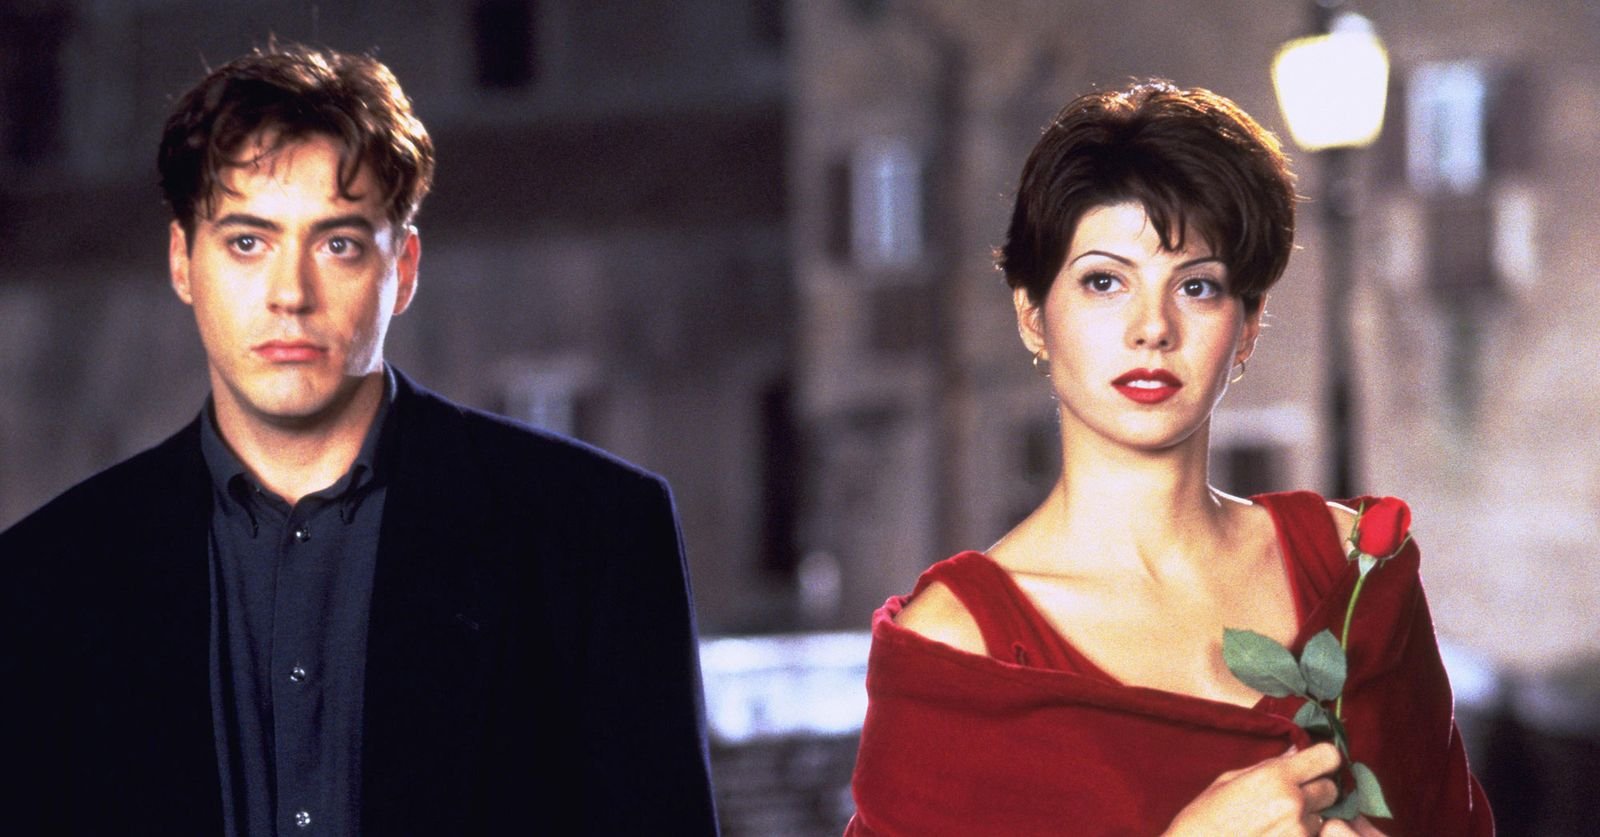 What Really Happened Between Marisa Tomei And Robert Downey Jr?